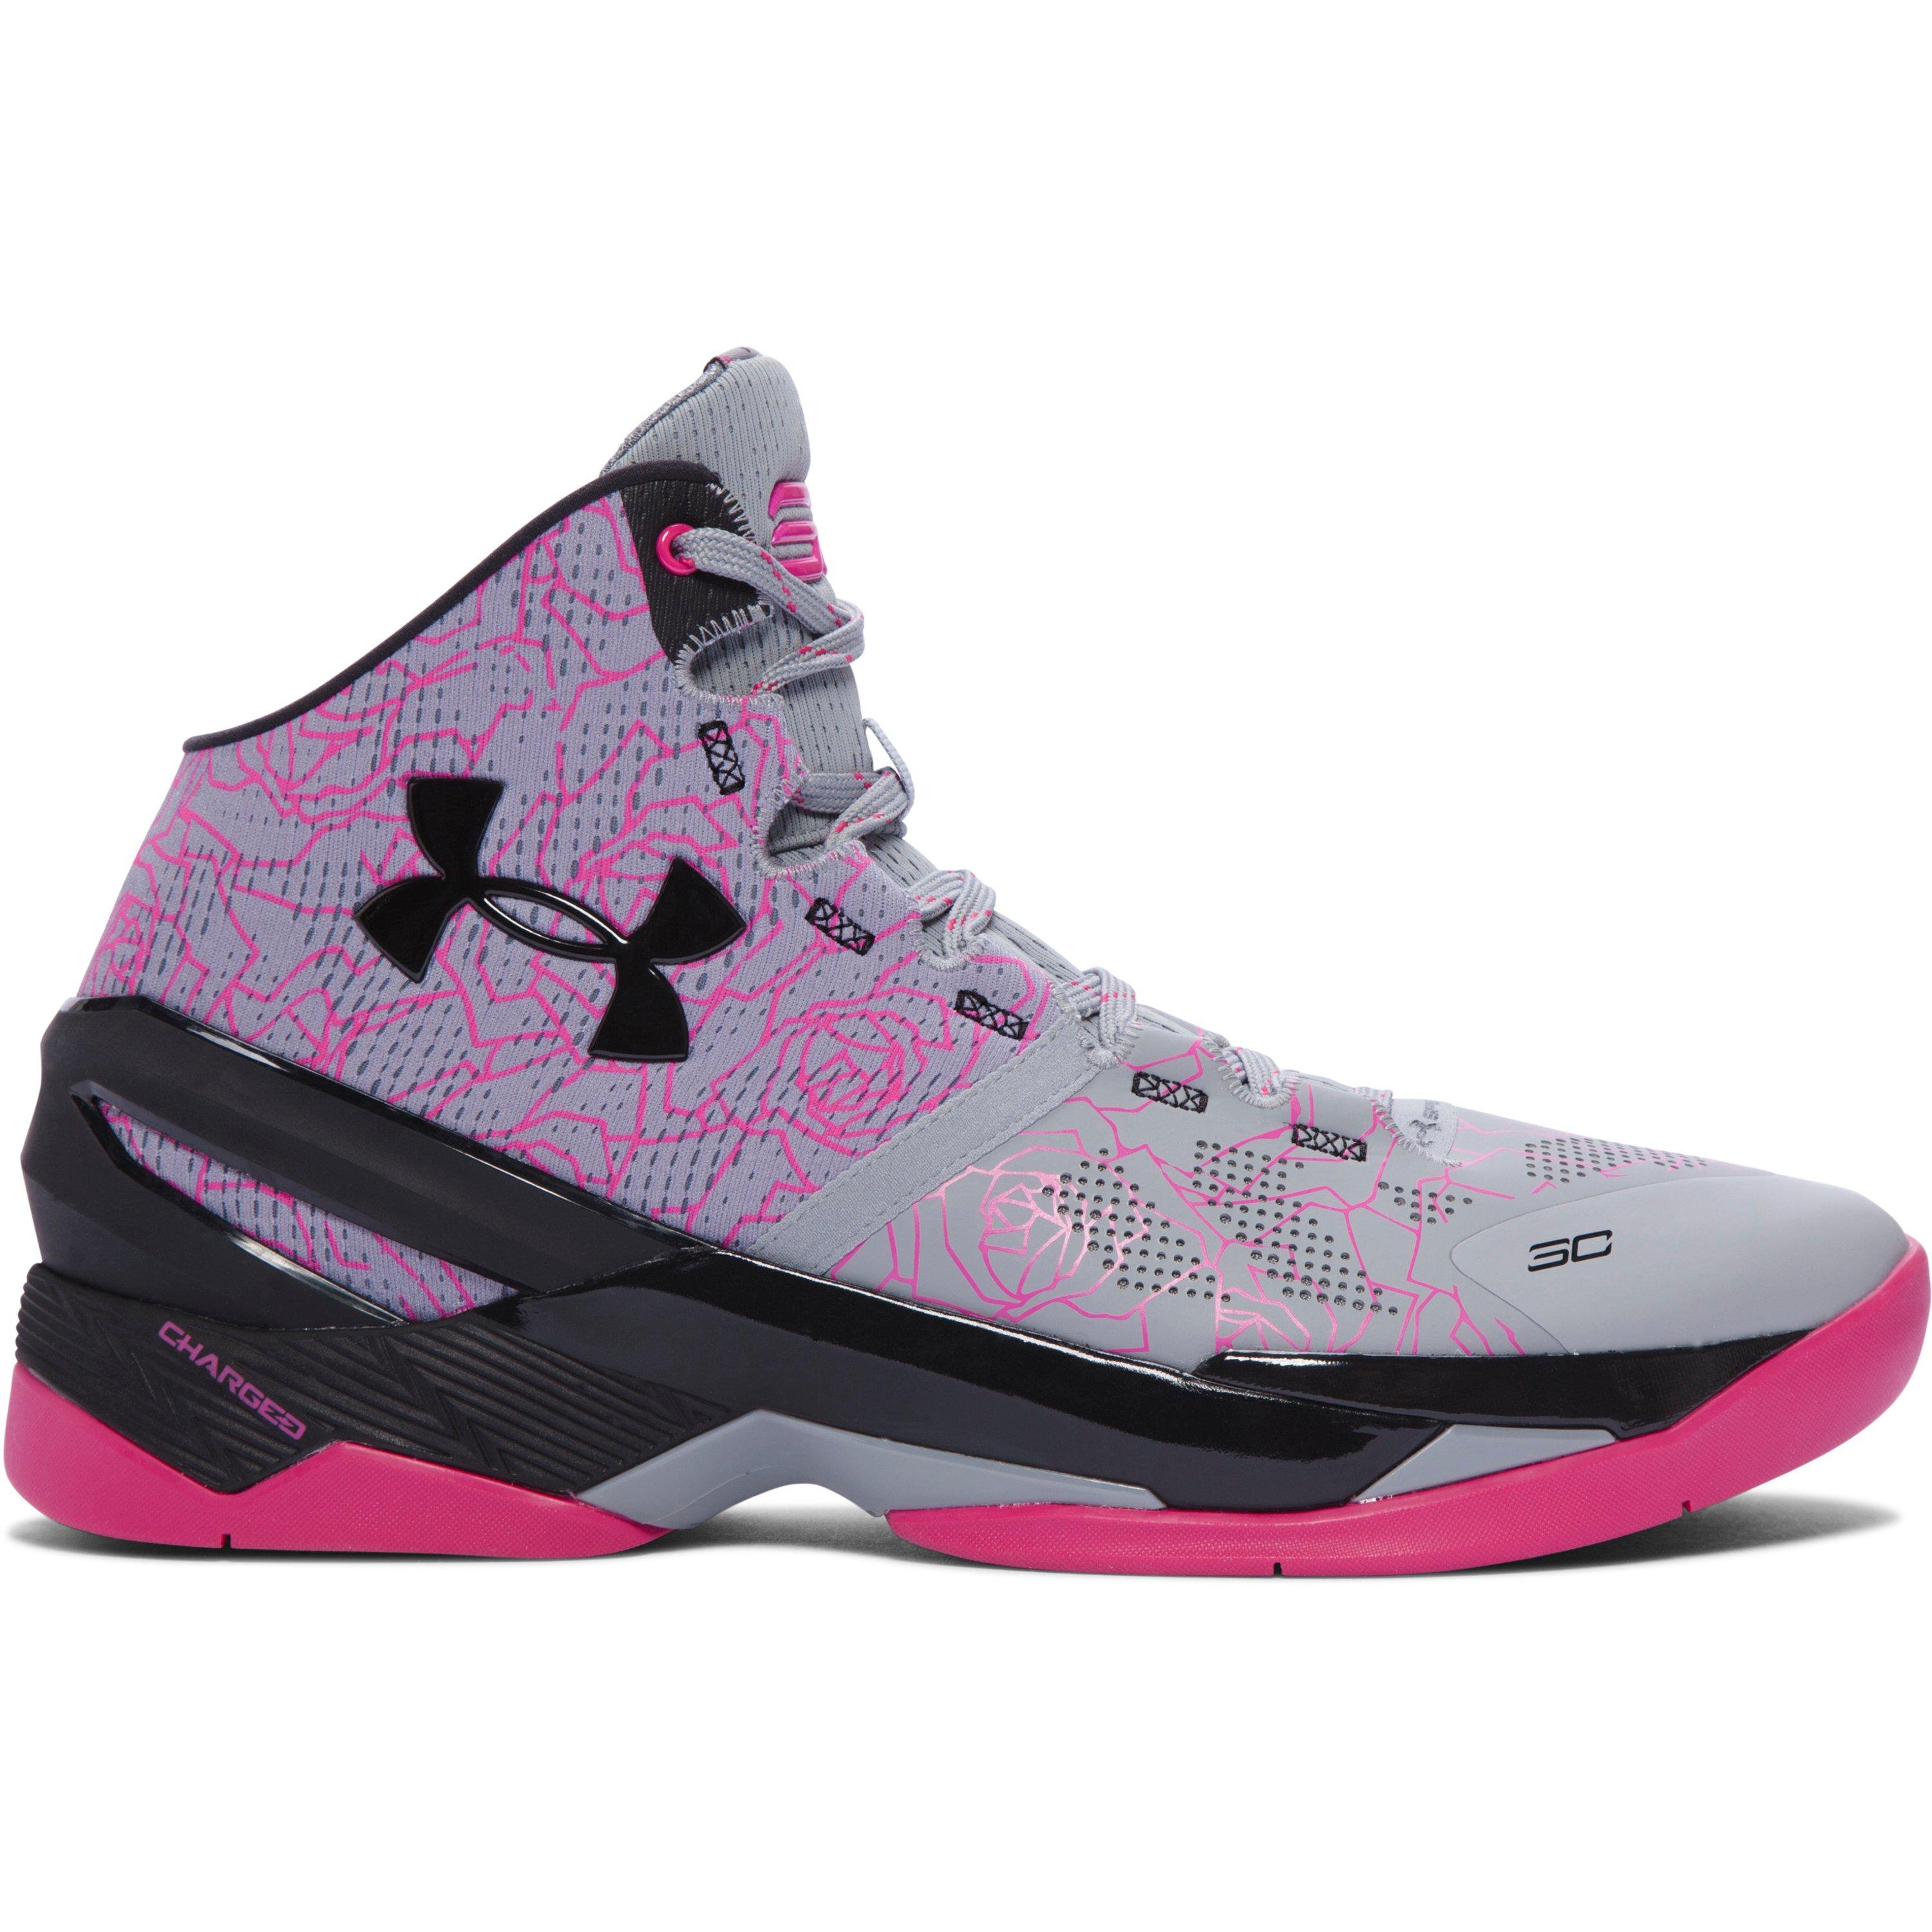 Lyst Under Armour Men's Ua Curry Two Basketball Shoes in